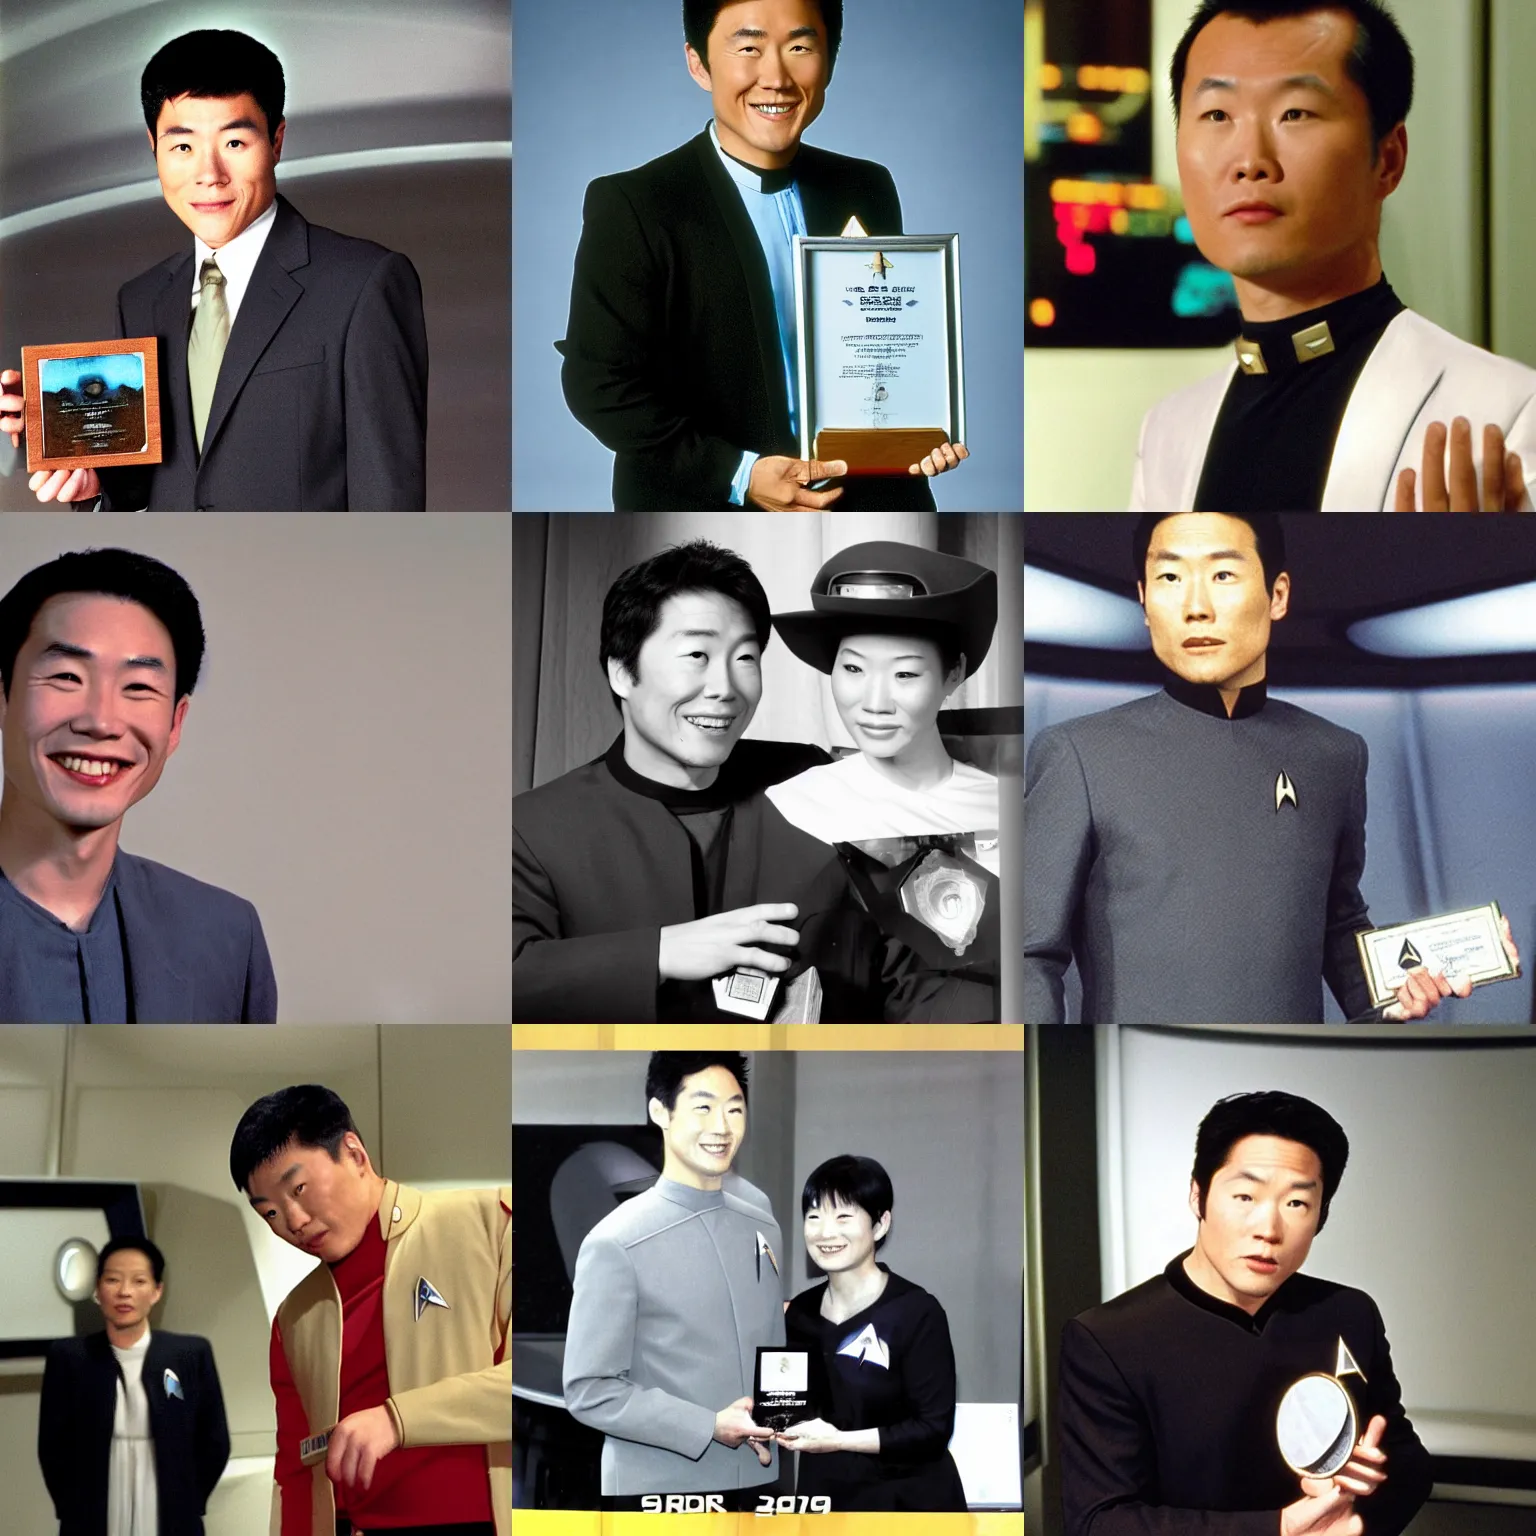 Prompt: A picture of Henry Kim from Star Trek Voyager getting a promotion, award winning photography